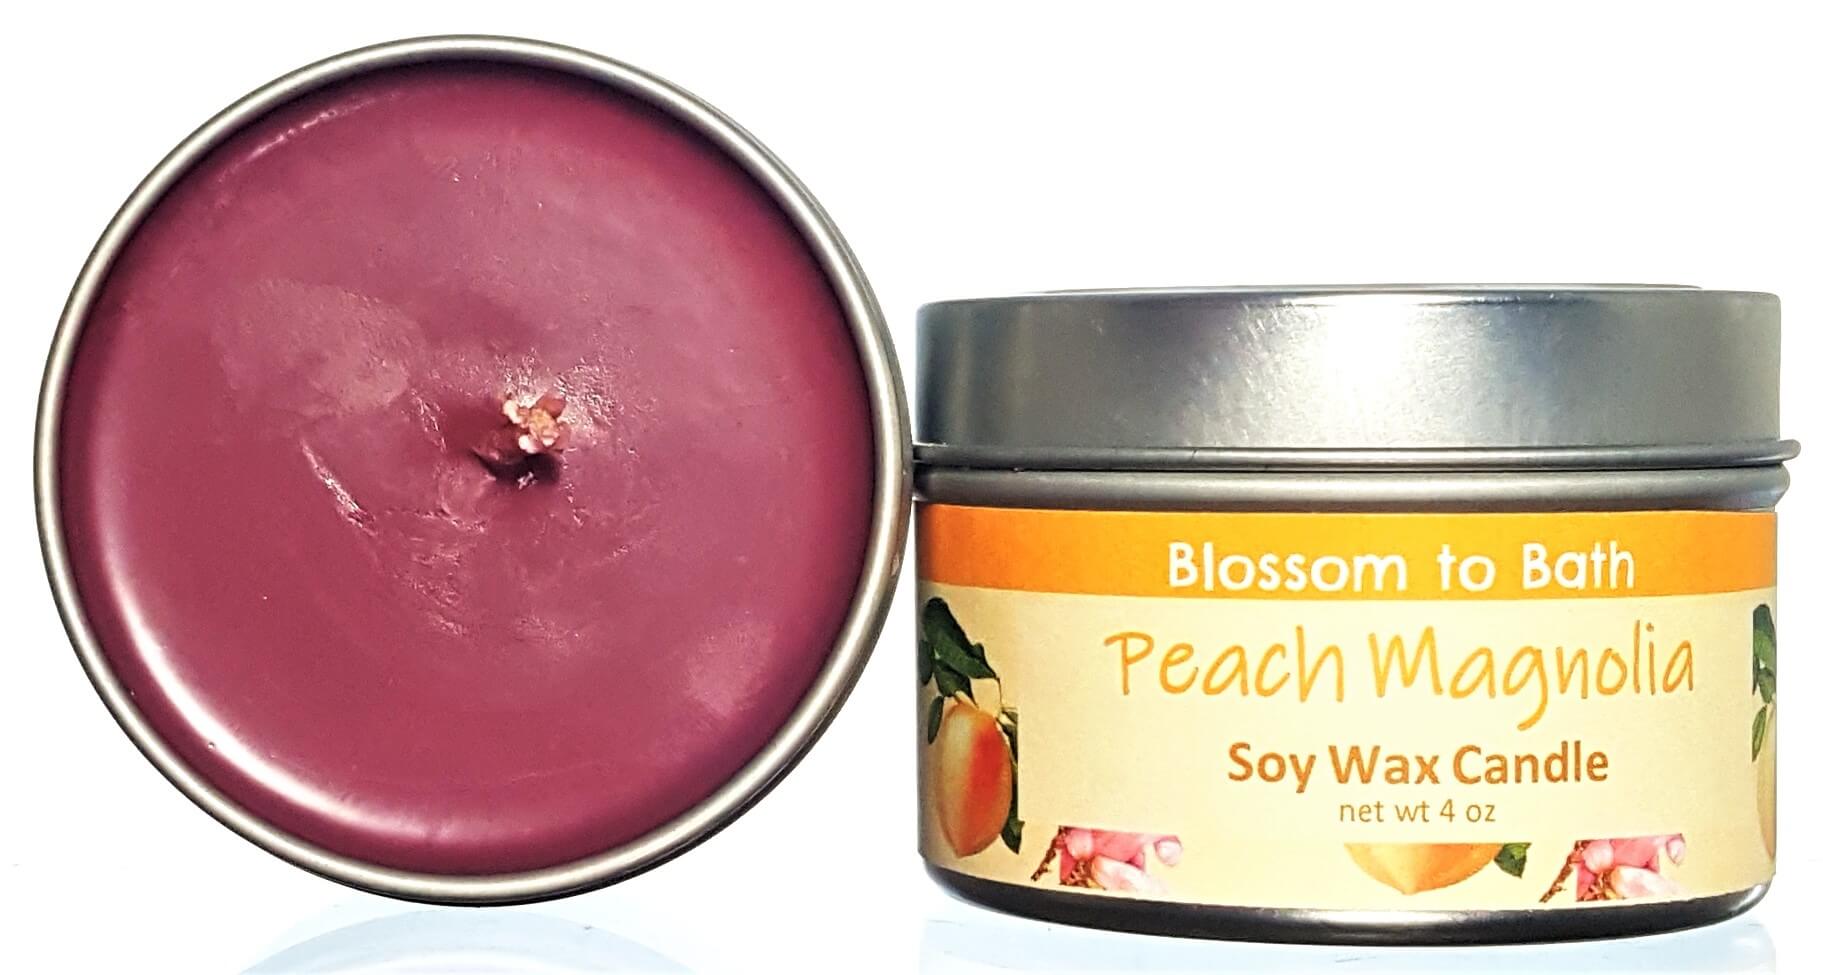 Buy Blossom to Bath Peach Magnolia Soy Wax Candle from Flowersong Soap Studio.  Fill the air with a charming fragrance that lasts for hours  An intoxicating blend of peach, magnolia, and raspberry.